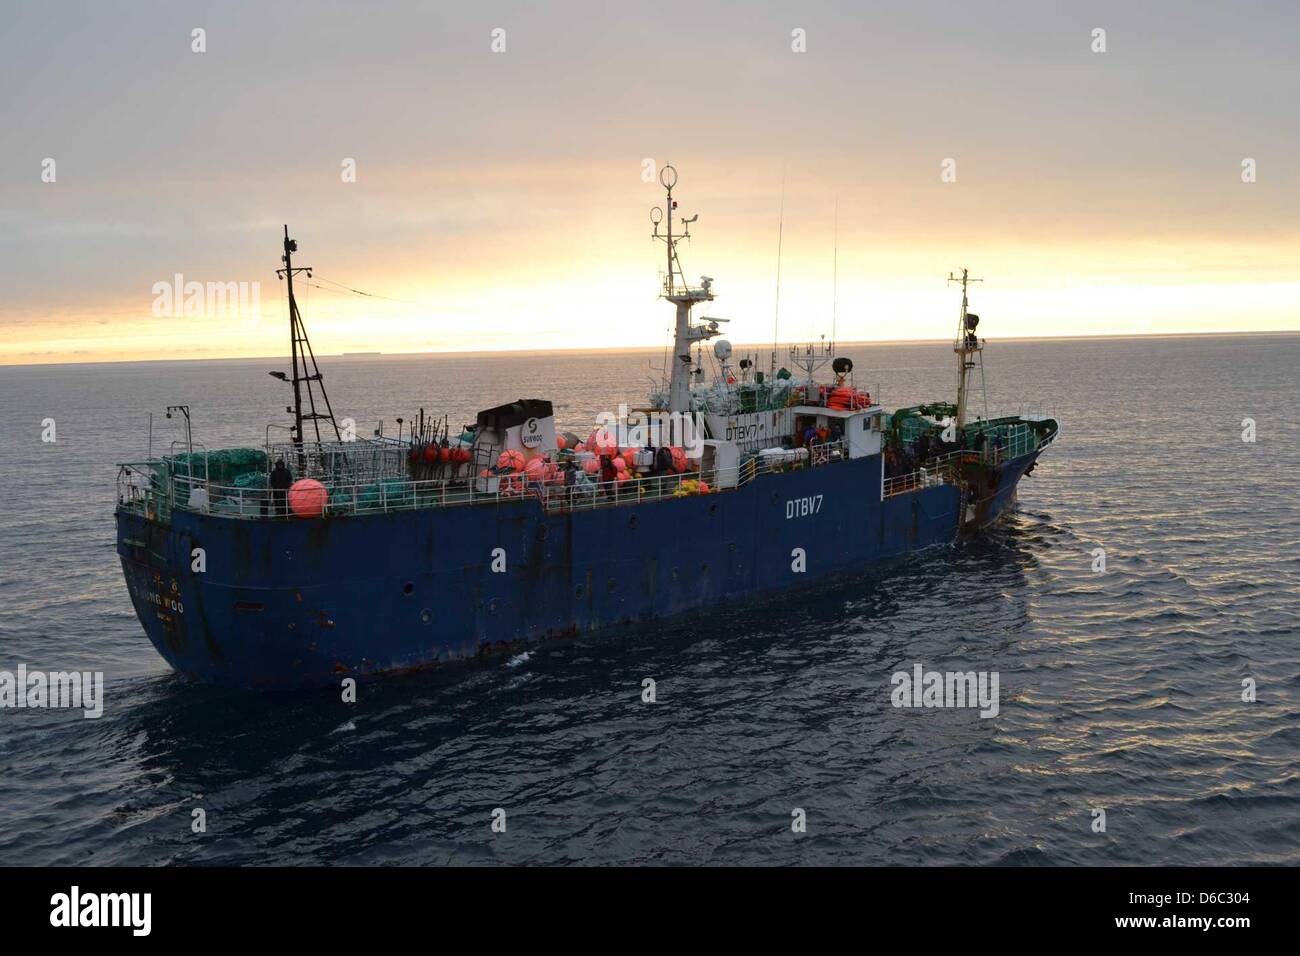 A sister ship takes on crew of the burning South Korean fishing trawler 'Jeong Woo 2' in the Antartic, 11 January 2012. A Russian fishing trawler collided with an iceberg before Christmas and now, a South Korean trawler has caught fire. 37 people were rescued by two nearby ships, but three of the crew are probably dead after the ship burned for hours before sinking, according to th Stock Photo